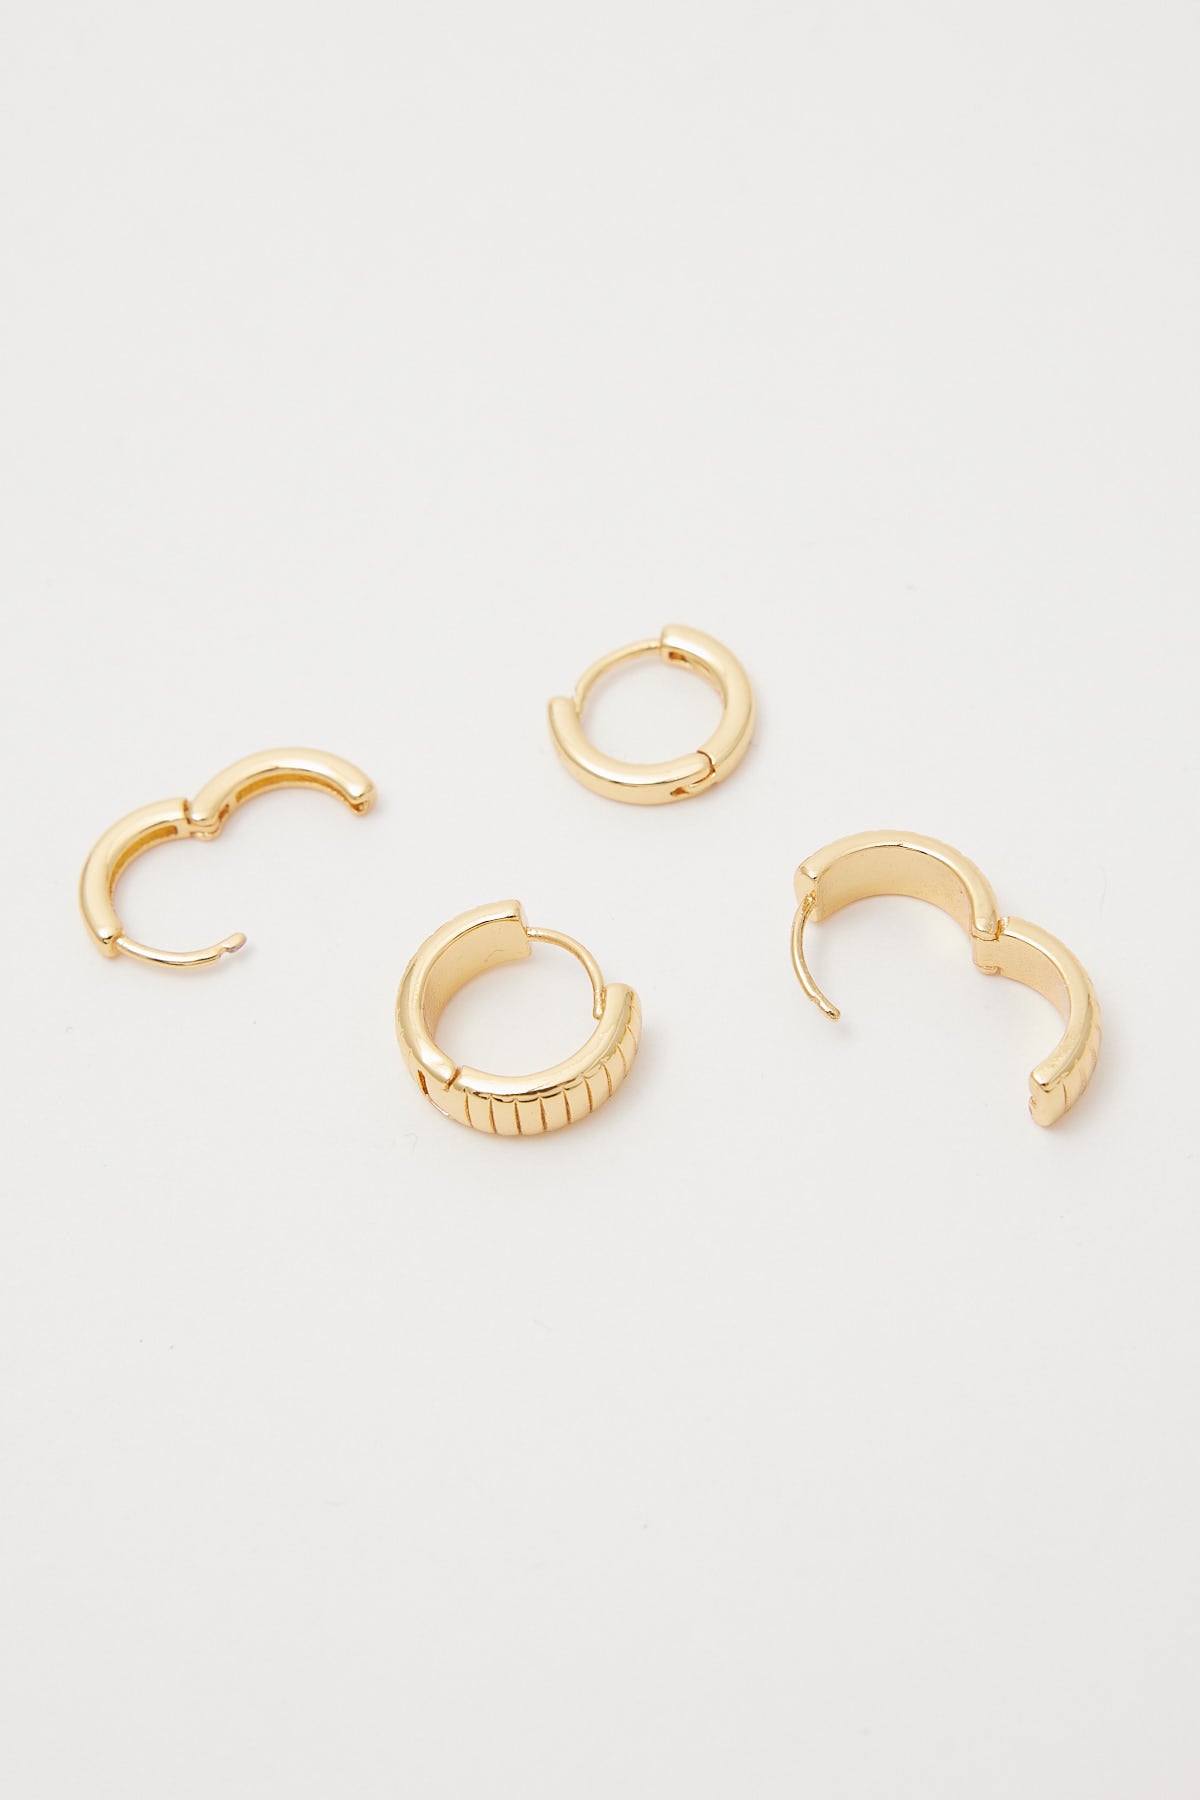 Perfect Stranger Classy Plated Huggie Earring Pack - 18K Gold Plated Gold